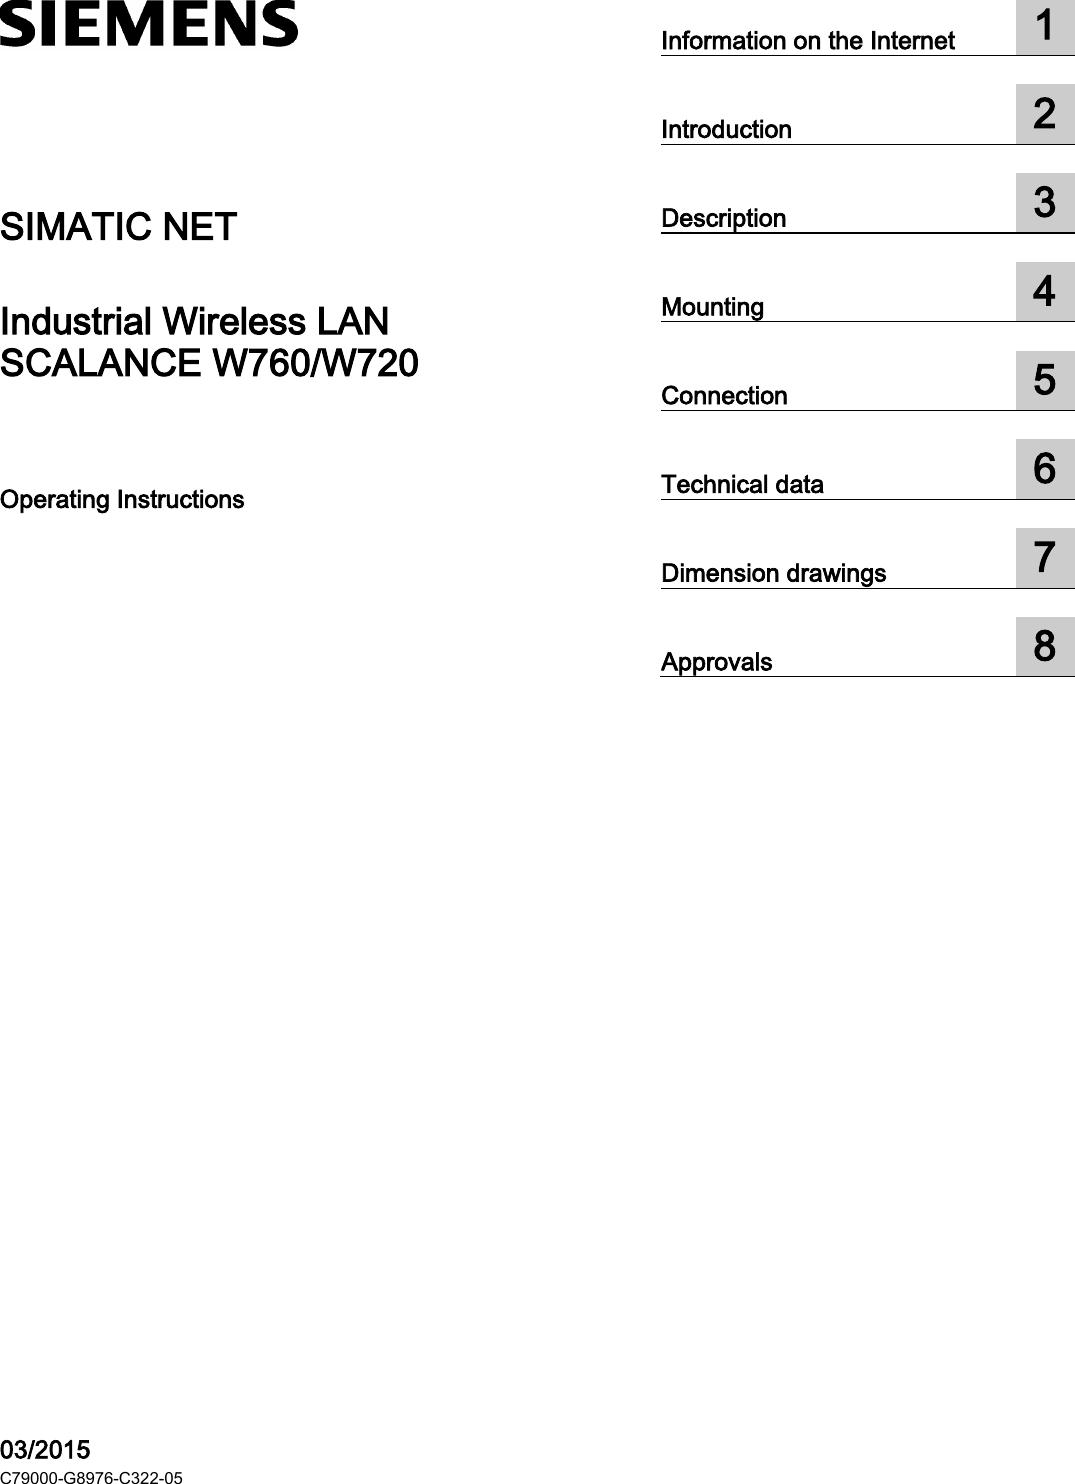   SCALANCE W760/W720  ___________________ ___________________ ___________________ ___________________ ___________________ ___________________ ___________________ ___________________  SIMATIC NET Industrial Wireless LAN SCALANCE W760/W720 Operating Instructions    03/2015 C79000-G8976-C322-05 Information on the Internet  1  Introduction  2  Description  3  Mounting  4  Connection  5  Technical data  6  Dimension drawings  7  Approvals  8  